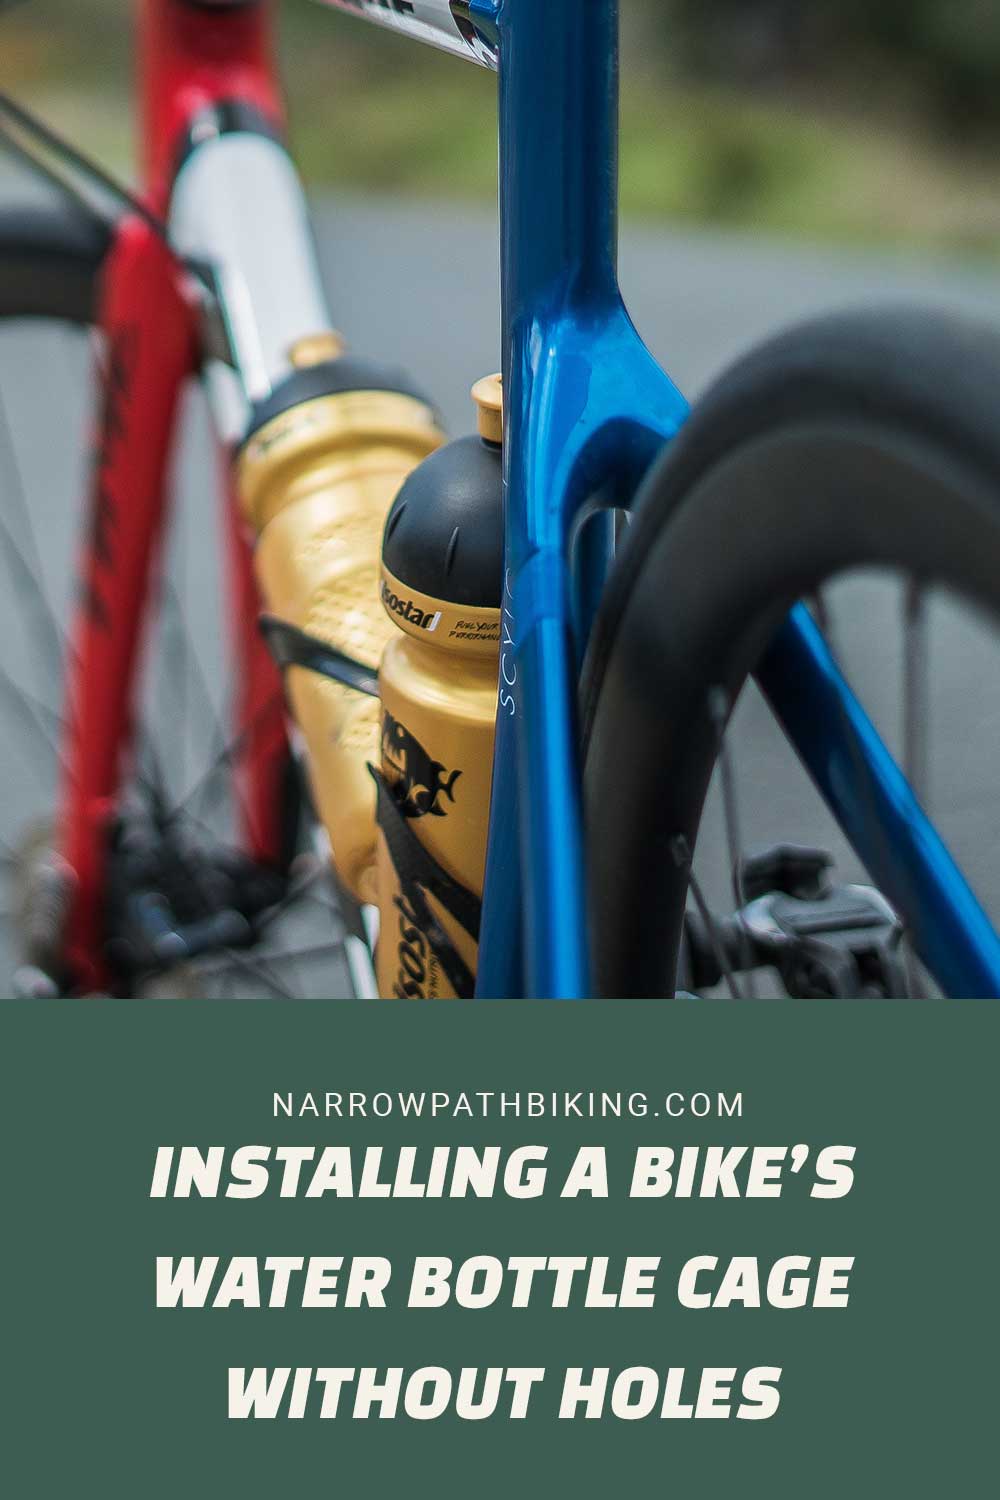 Installing a Bike’s Water Bottle Cage Without Holes